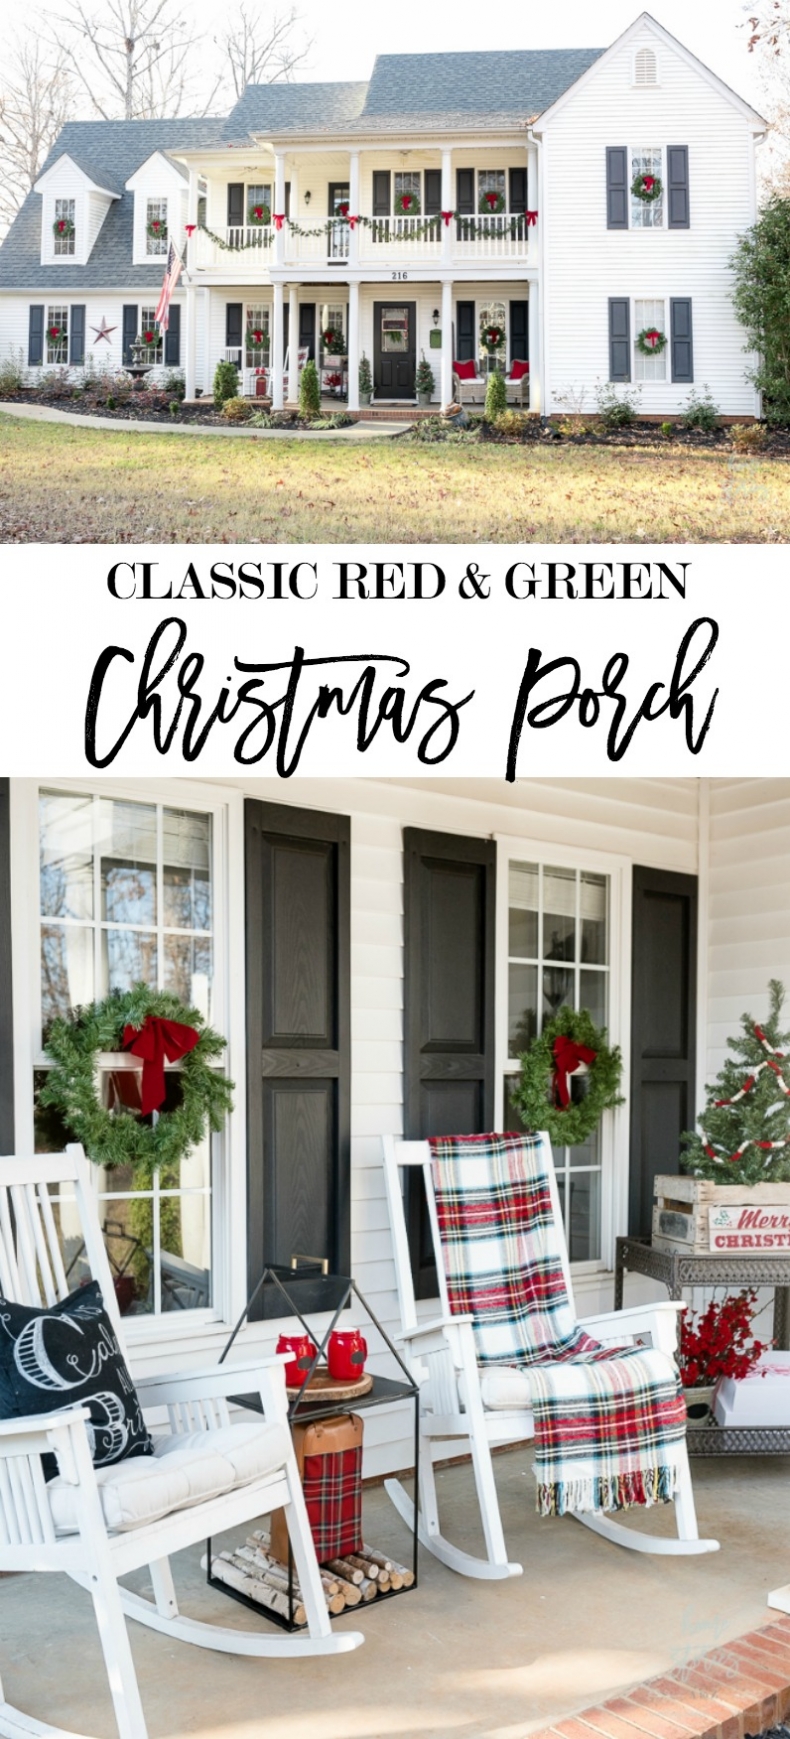 CLASSIC RED AND GREEN CHRISTMAS PORCH